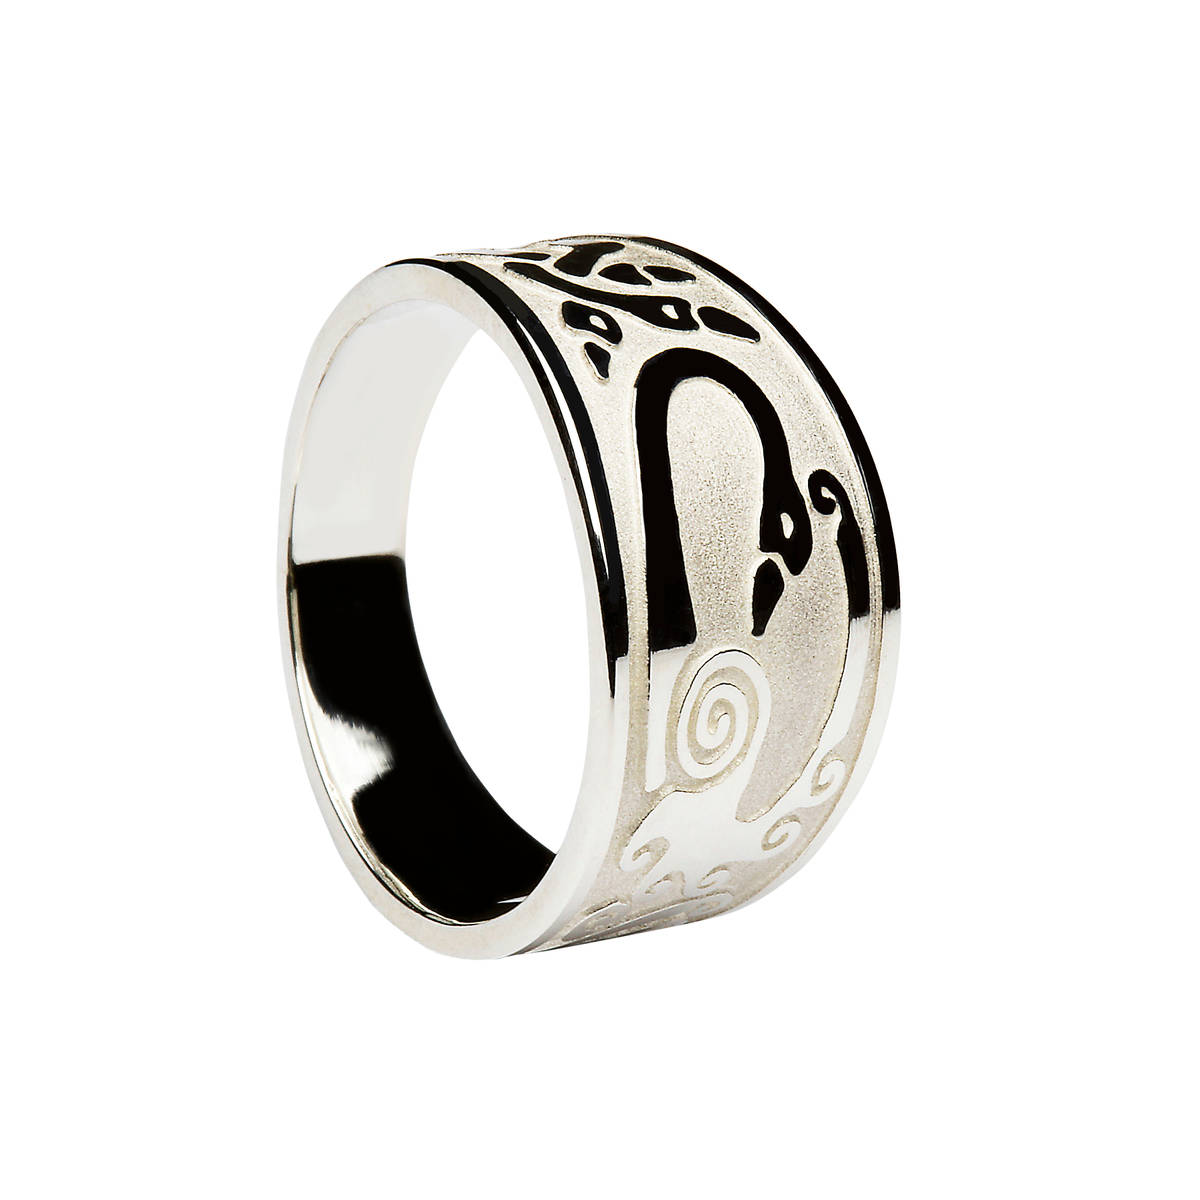 Silver Child Of Lir Ring Boxed